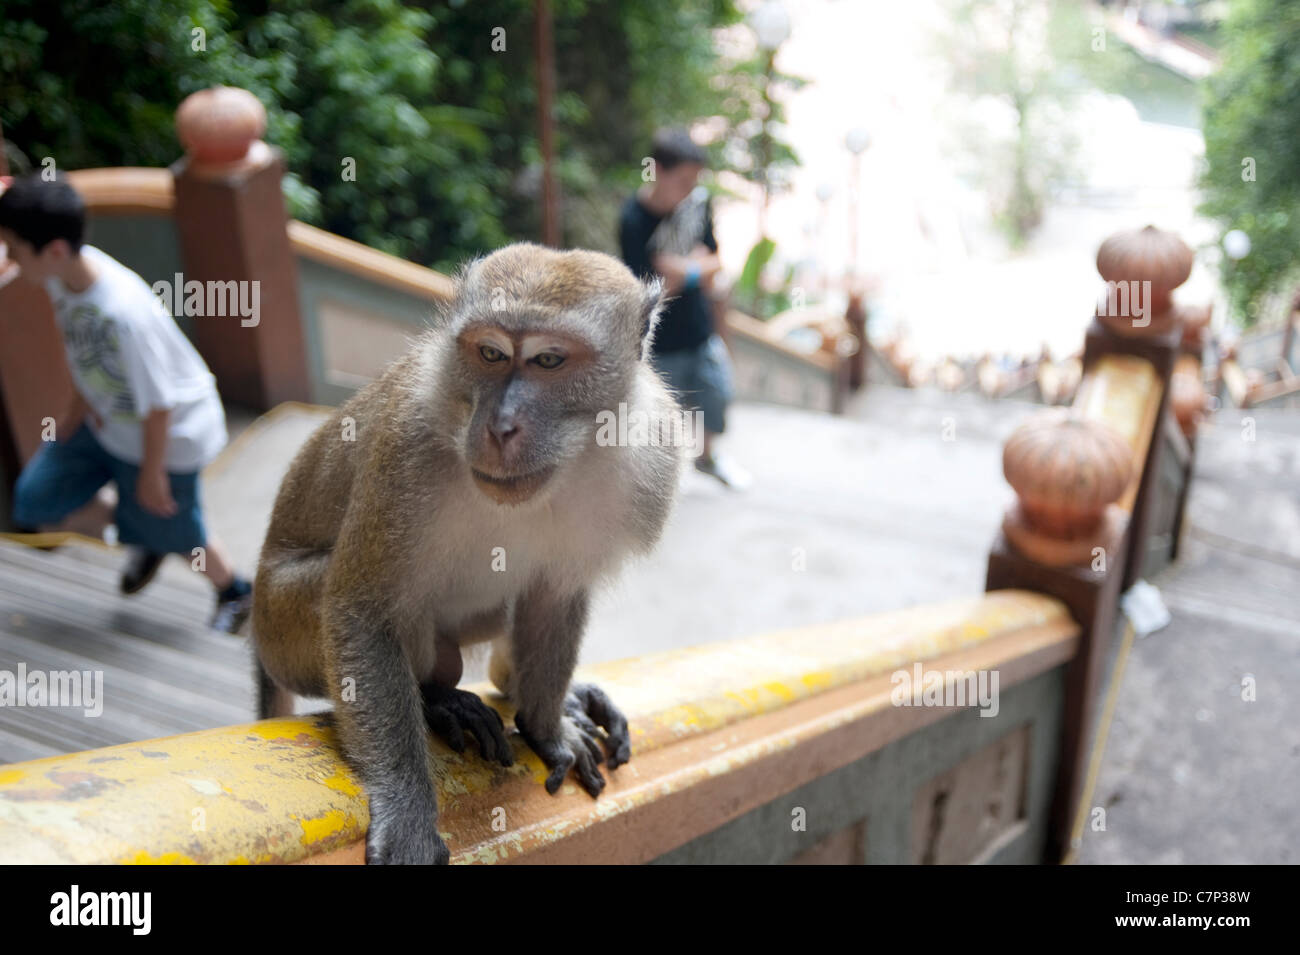 A monkey on the steps at the Batu Caves, on the outskirts of Kuala Lumpur Stock Photo